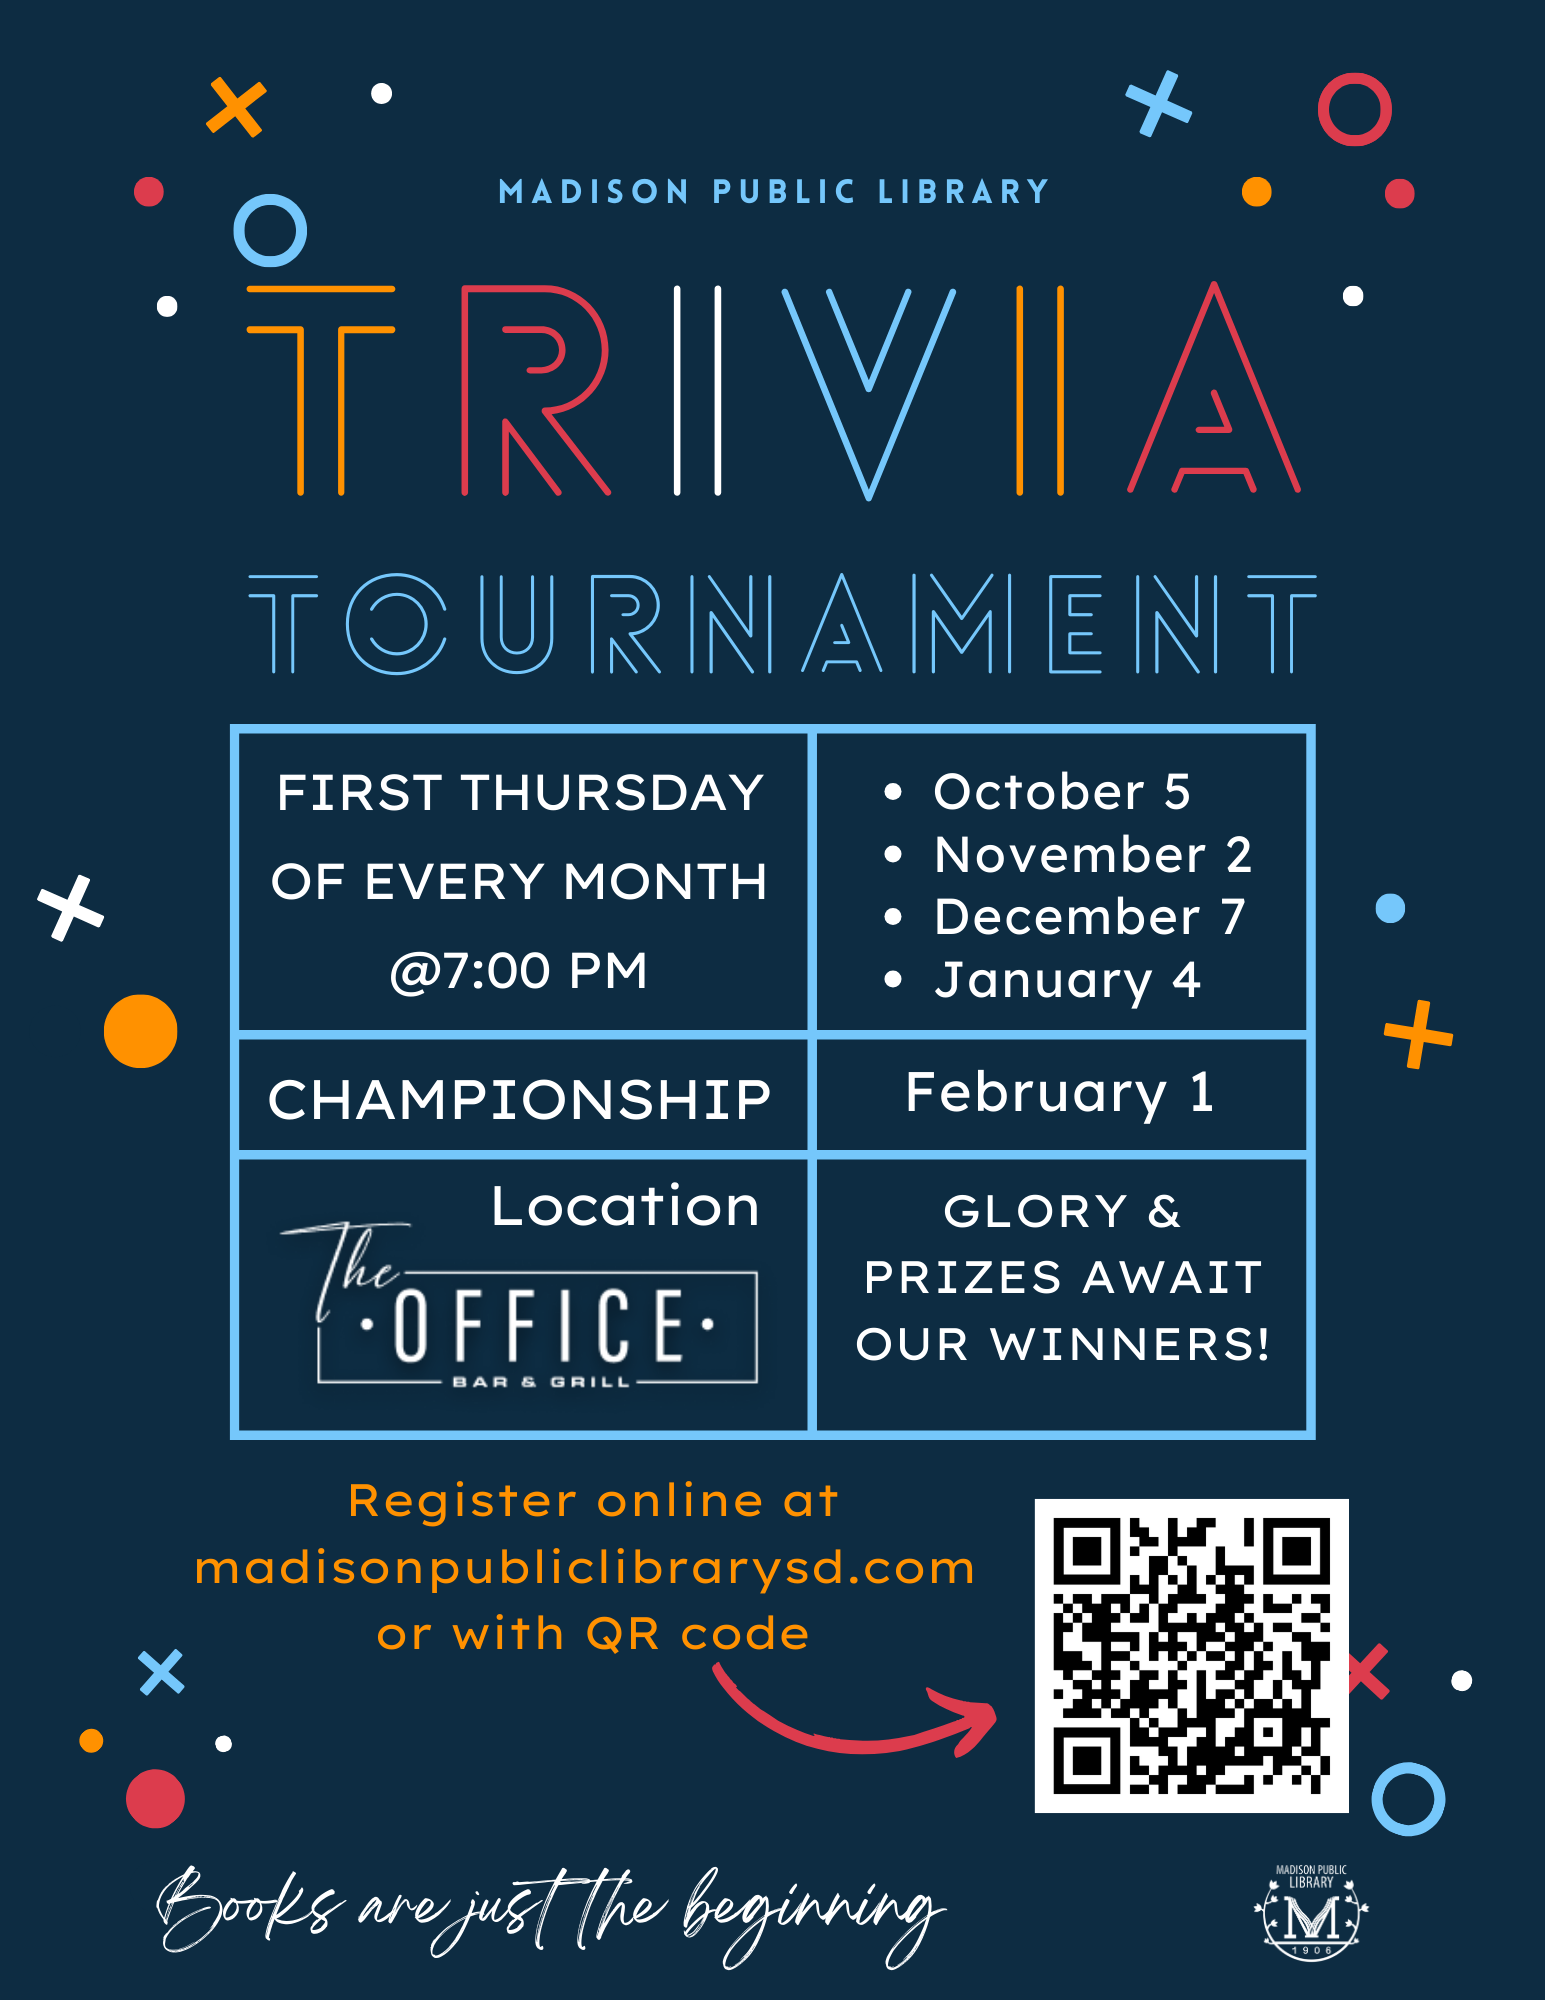 <h1 class="tribe-events-single-event-title">Library Trivia Tournament @ the Office</h1>